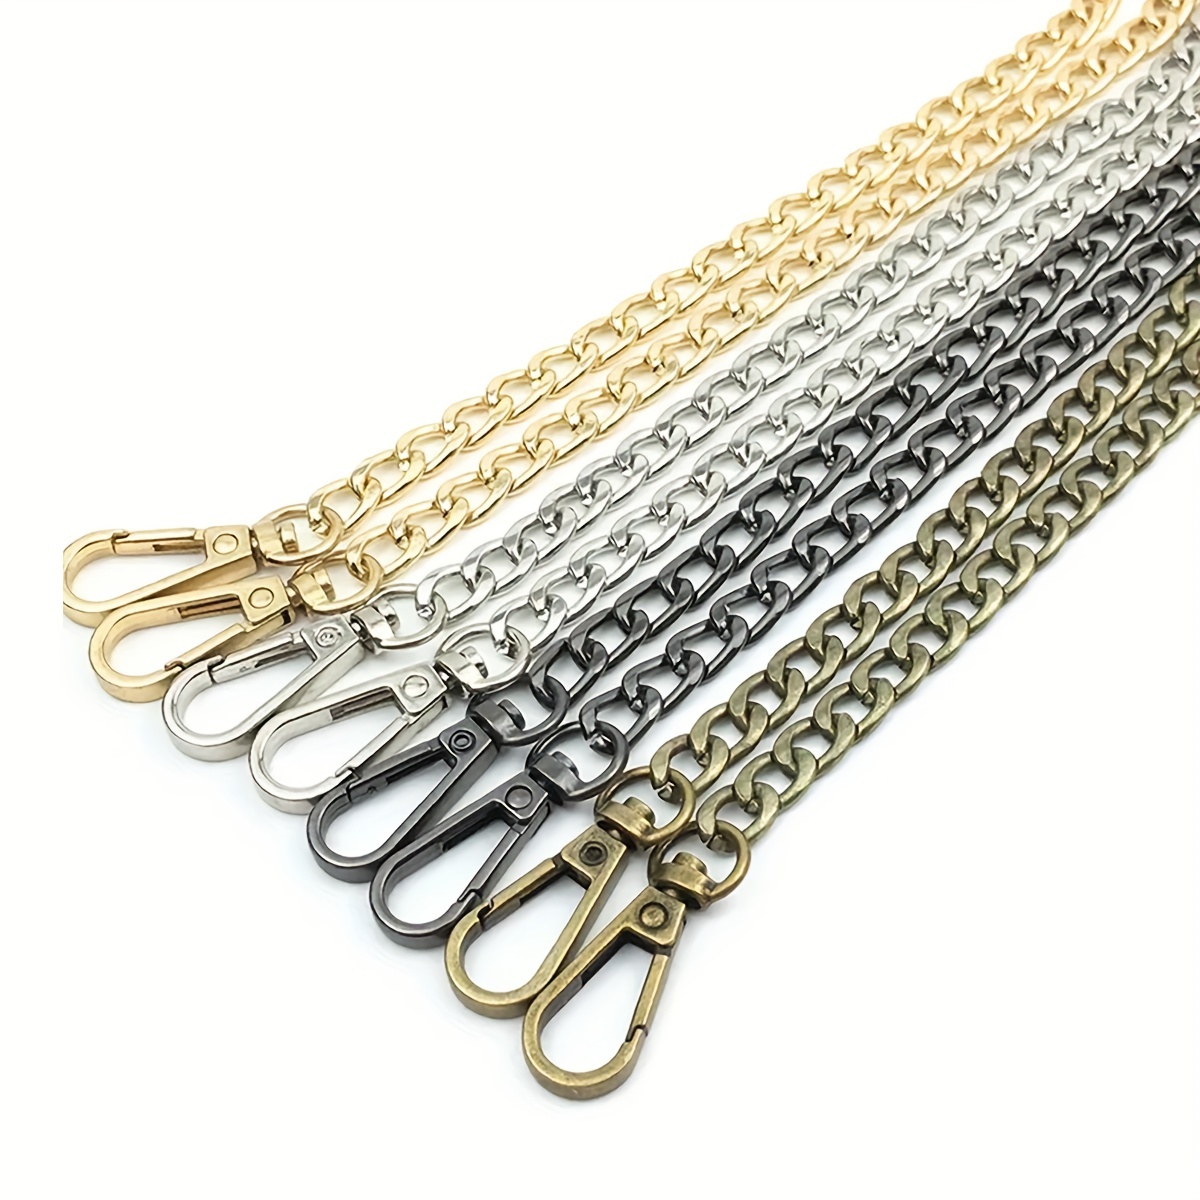 

120cm/60cm Metal Chain Accessories, Crossbody Shoulder Portable Wrist Bag Chain Strap Replacement, Luggage Accessories, Versatile Decoration, Available In 4 Colors